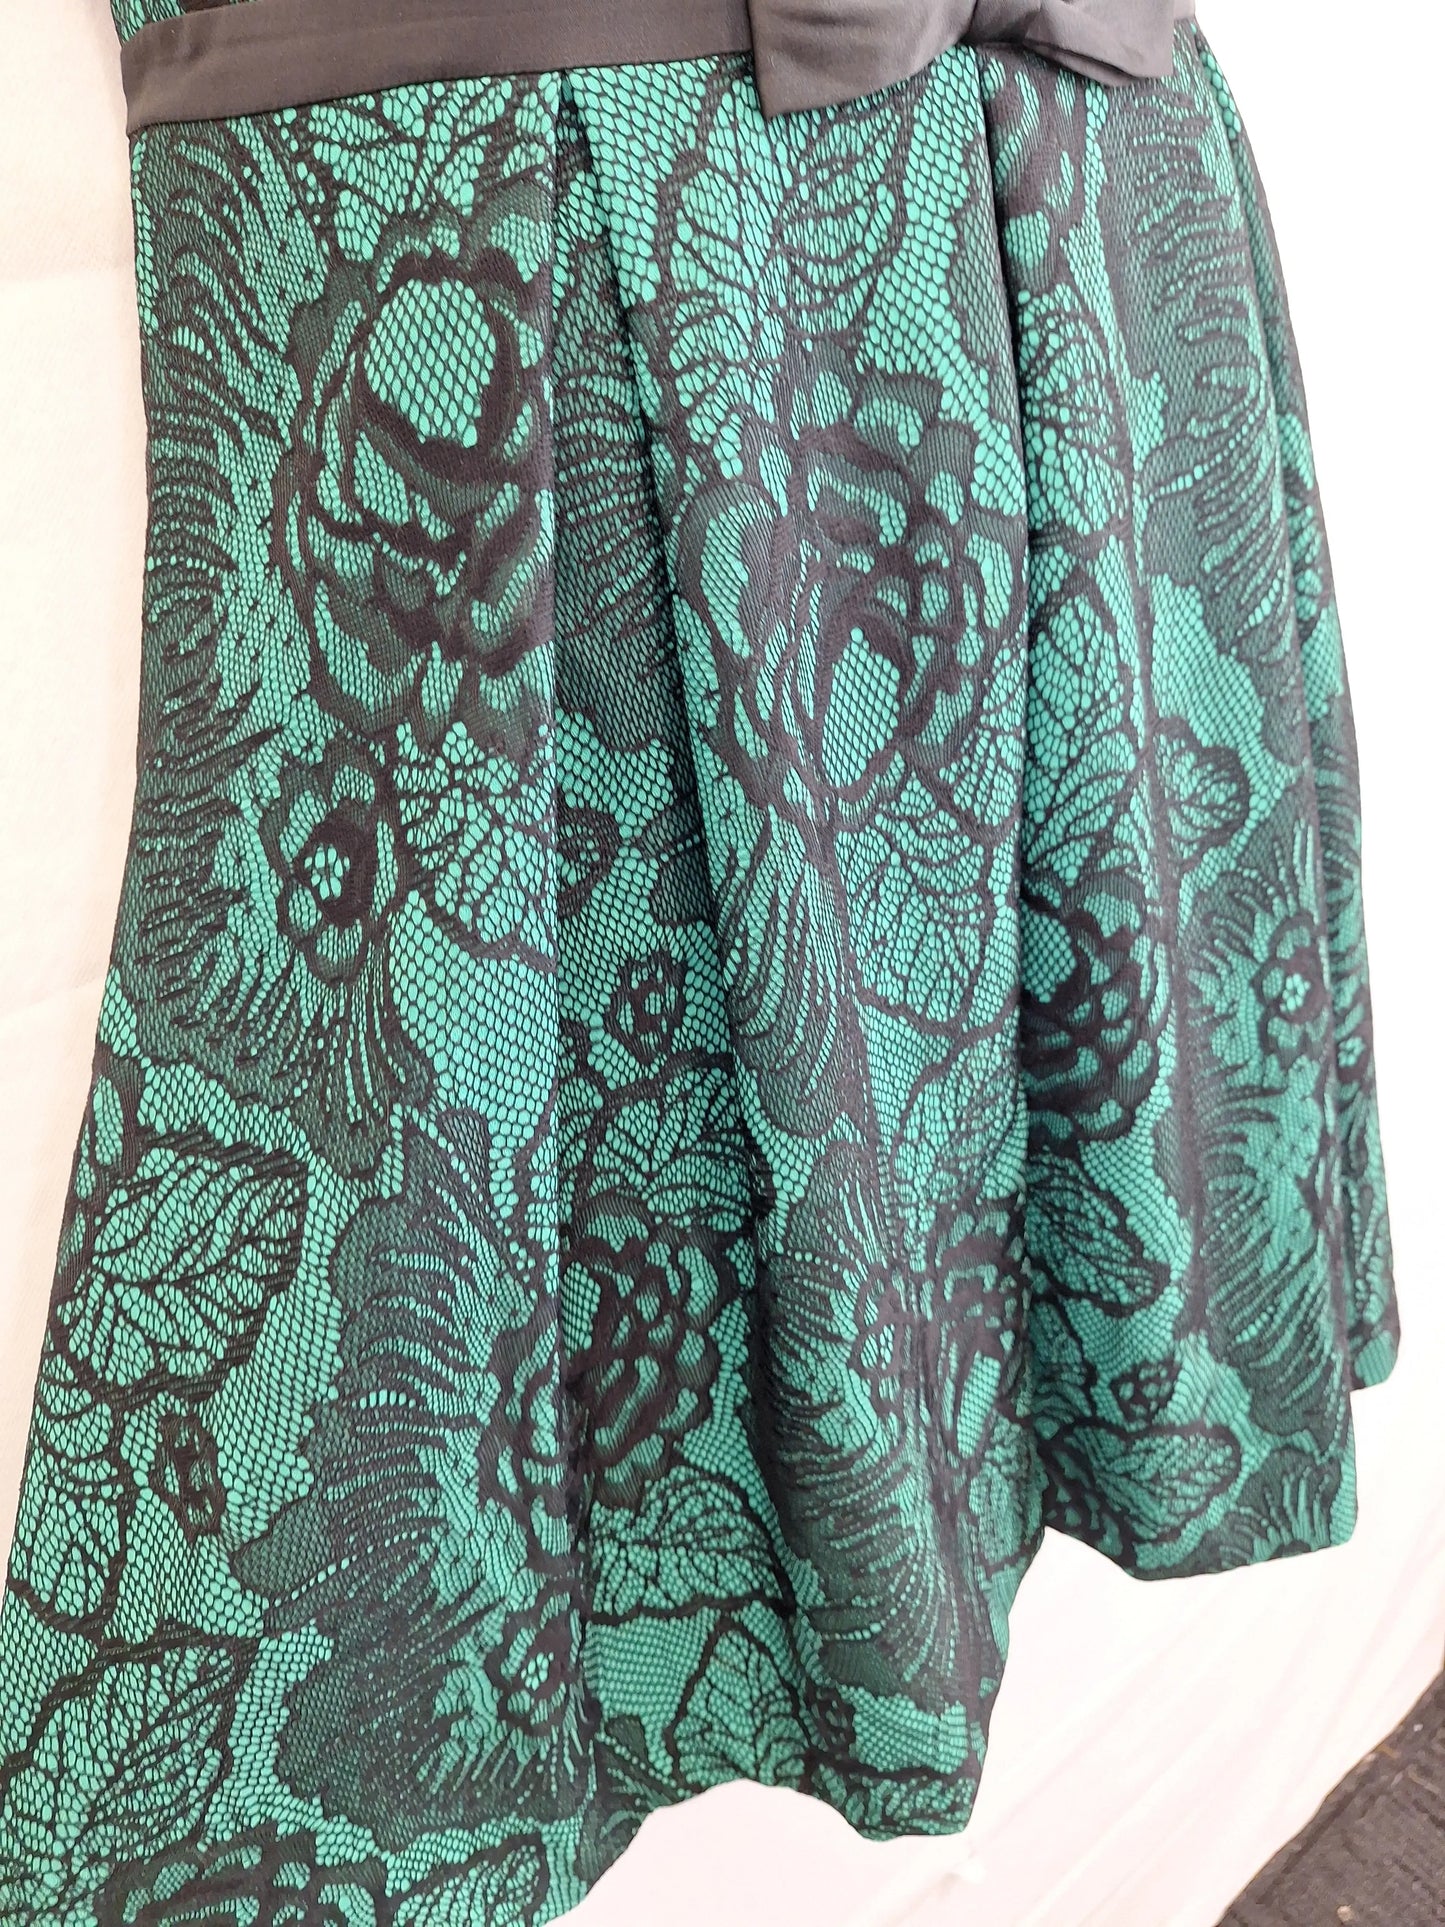 Review Cocktail Emerald Lace Mini Dress Size 14 by SwapUp-Online Second Hand Store-Online Thrift Store